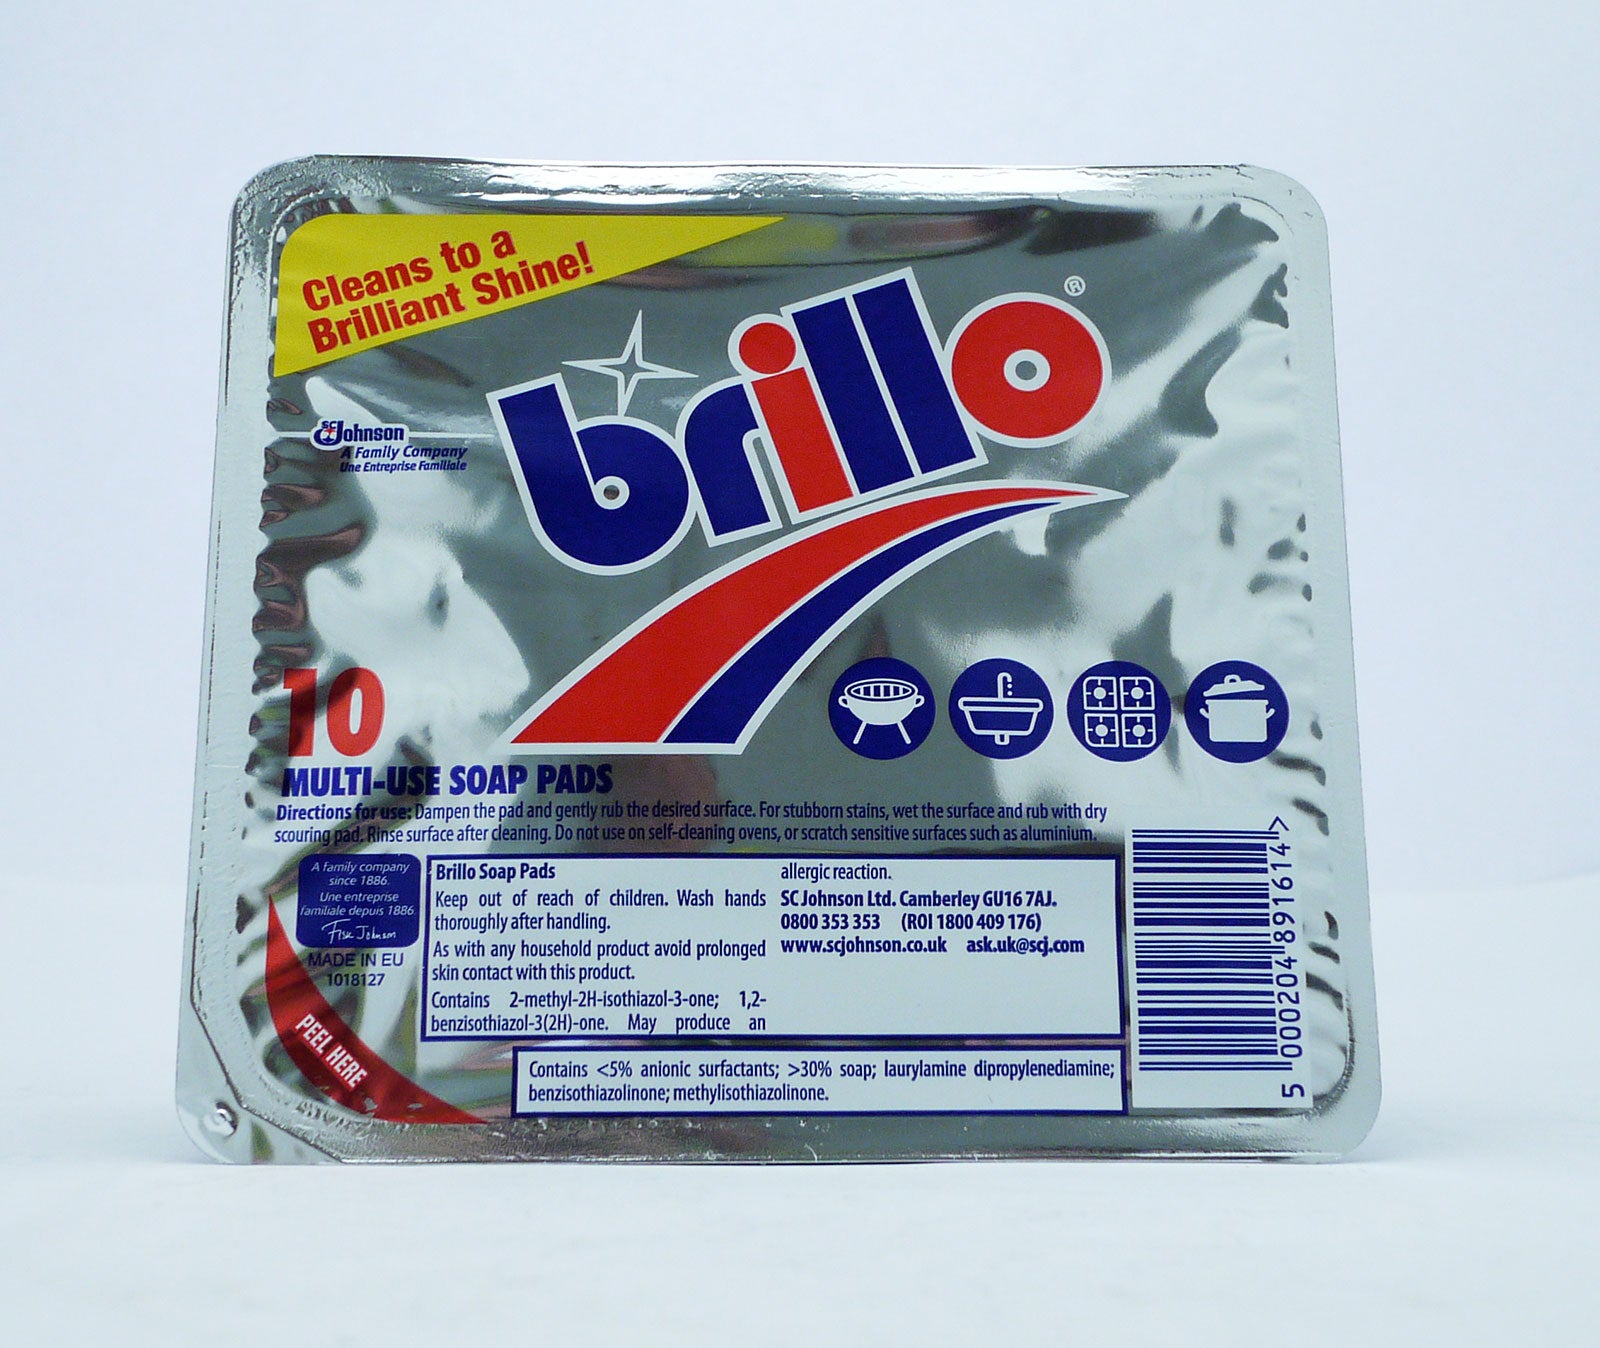 Mr. Muscle Brillos Soap Pads 10s